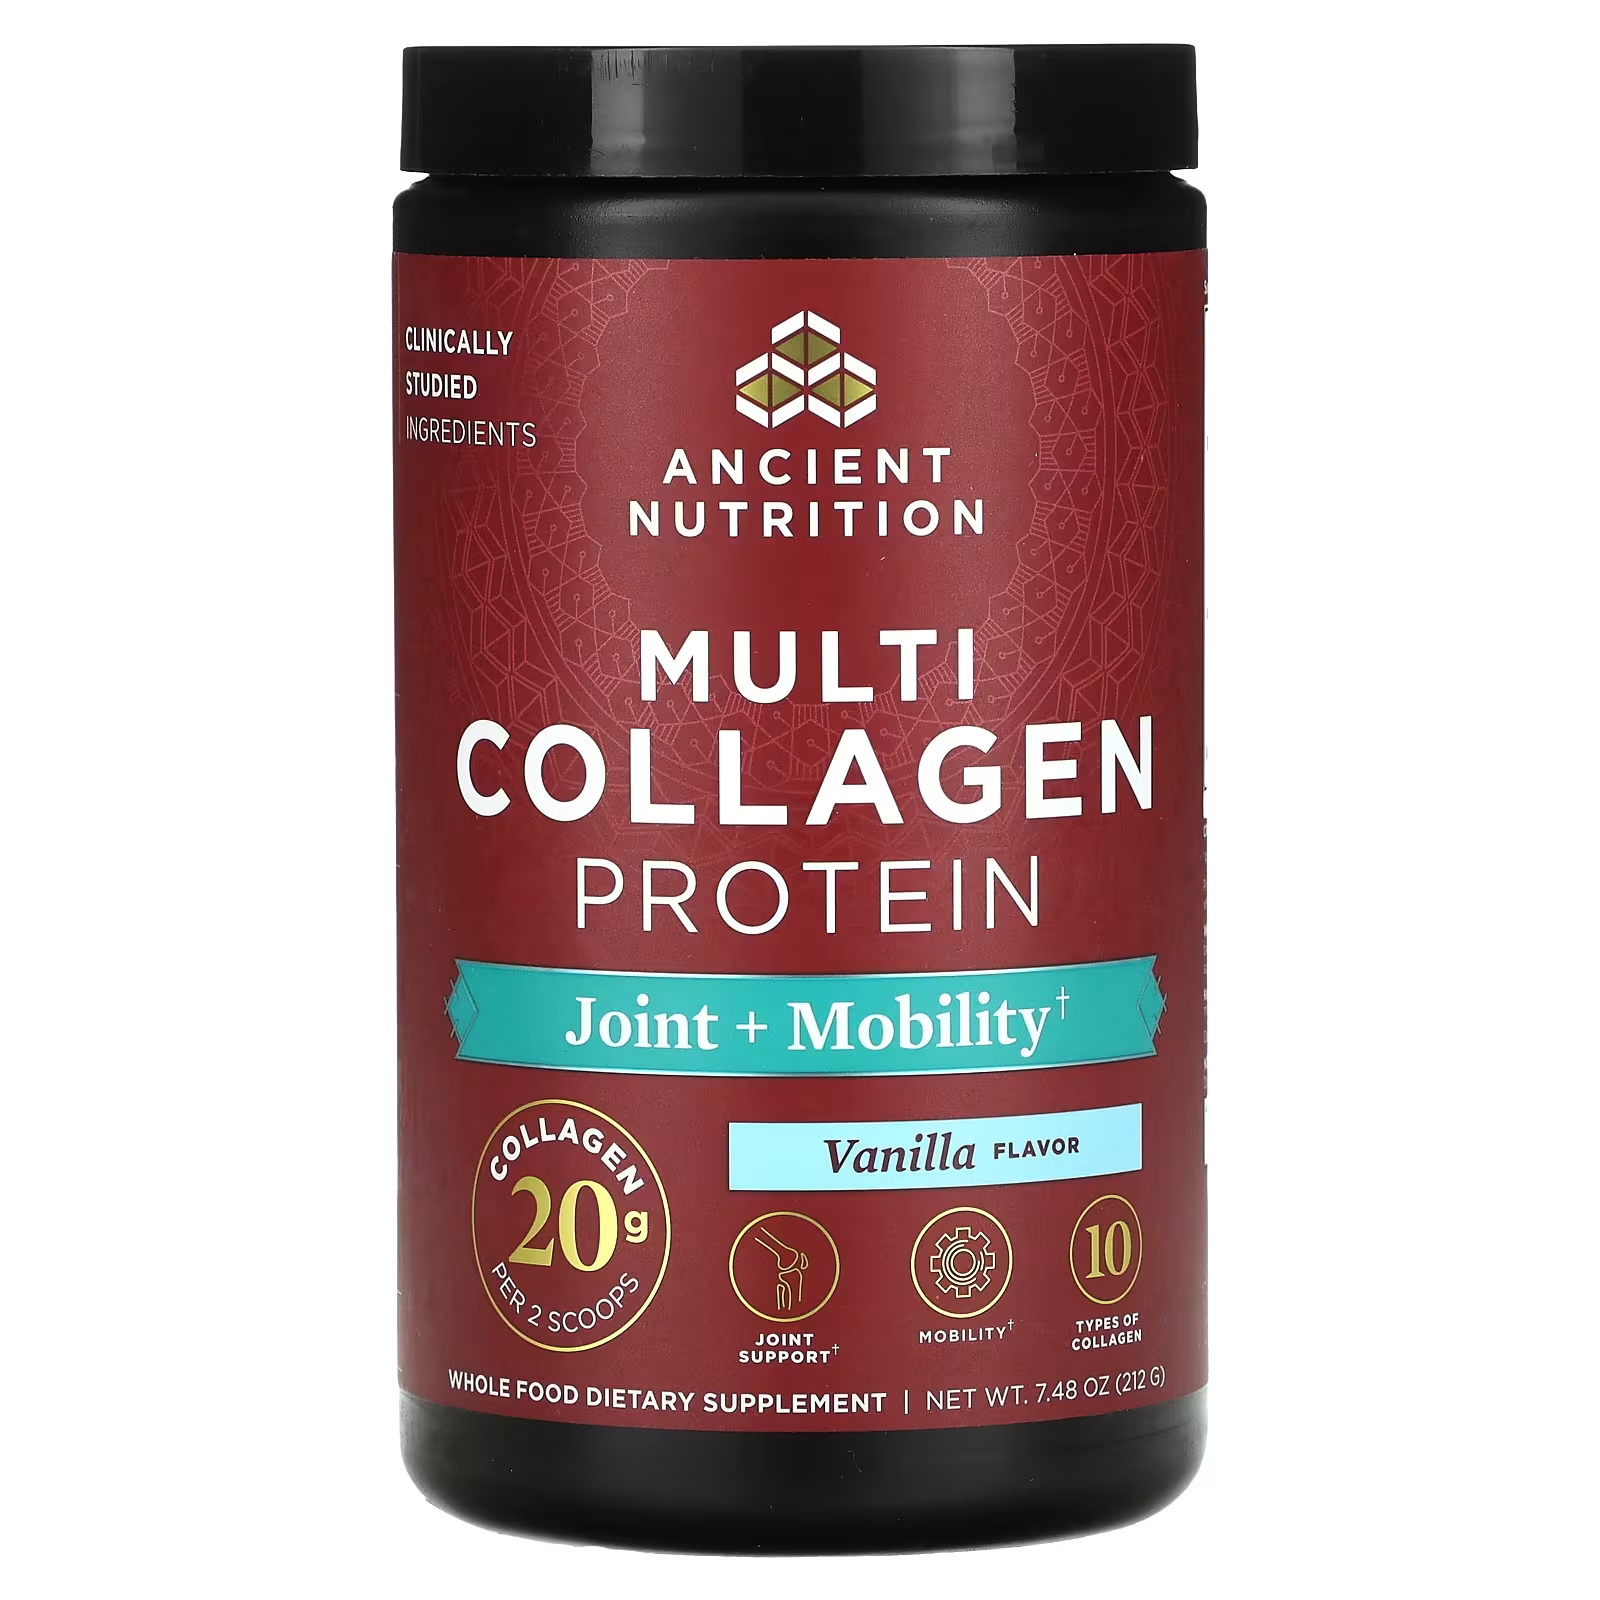 Пищевая добавка Ancient Nutrition Multi Collagen Protein Joint + Mobility Vanilla, 212 г пищевая добавка ancient nutrition multi collagen protein brain boost ванильный 454 5 г